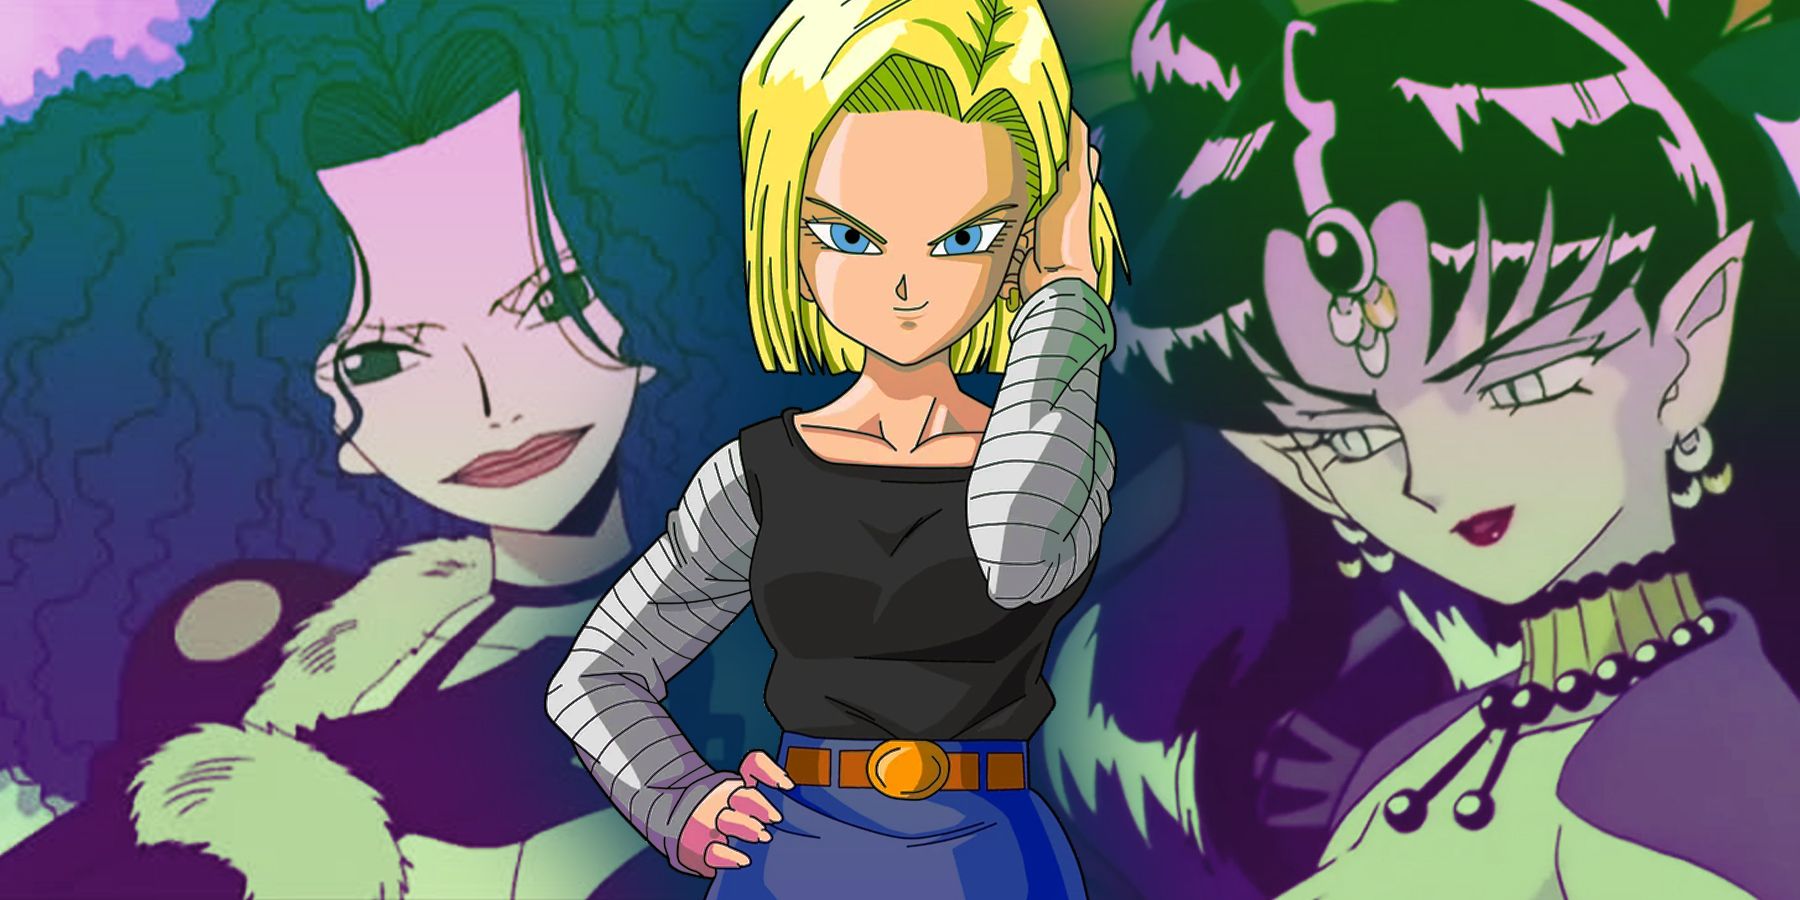 Miss Doublefinger from anime One Piece, Android 18 from Dragon Ball Z, and Nehelenia of anime Sailor Moon